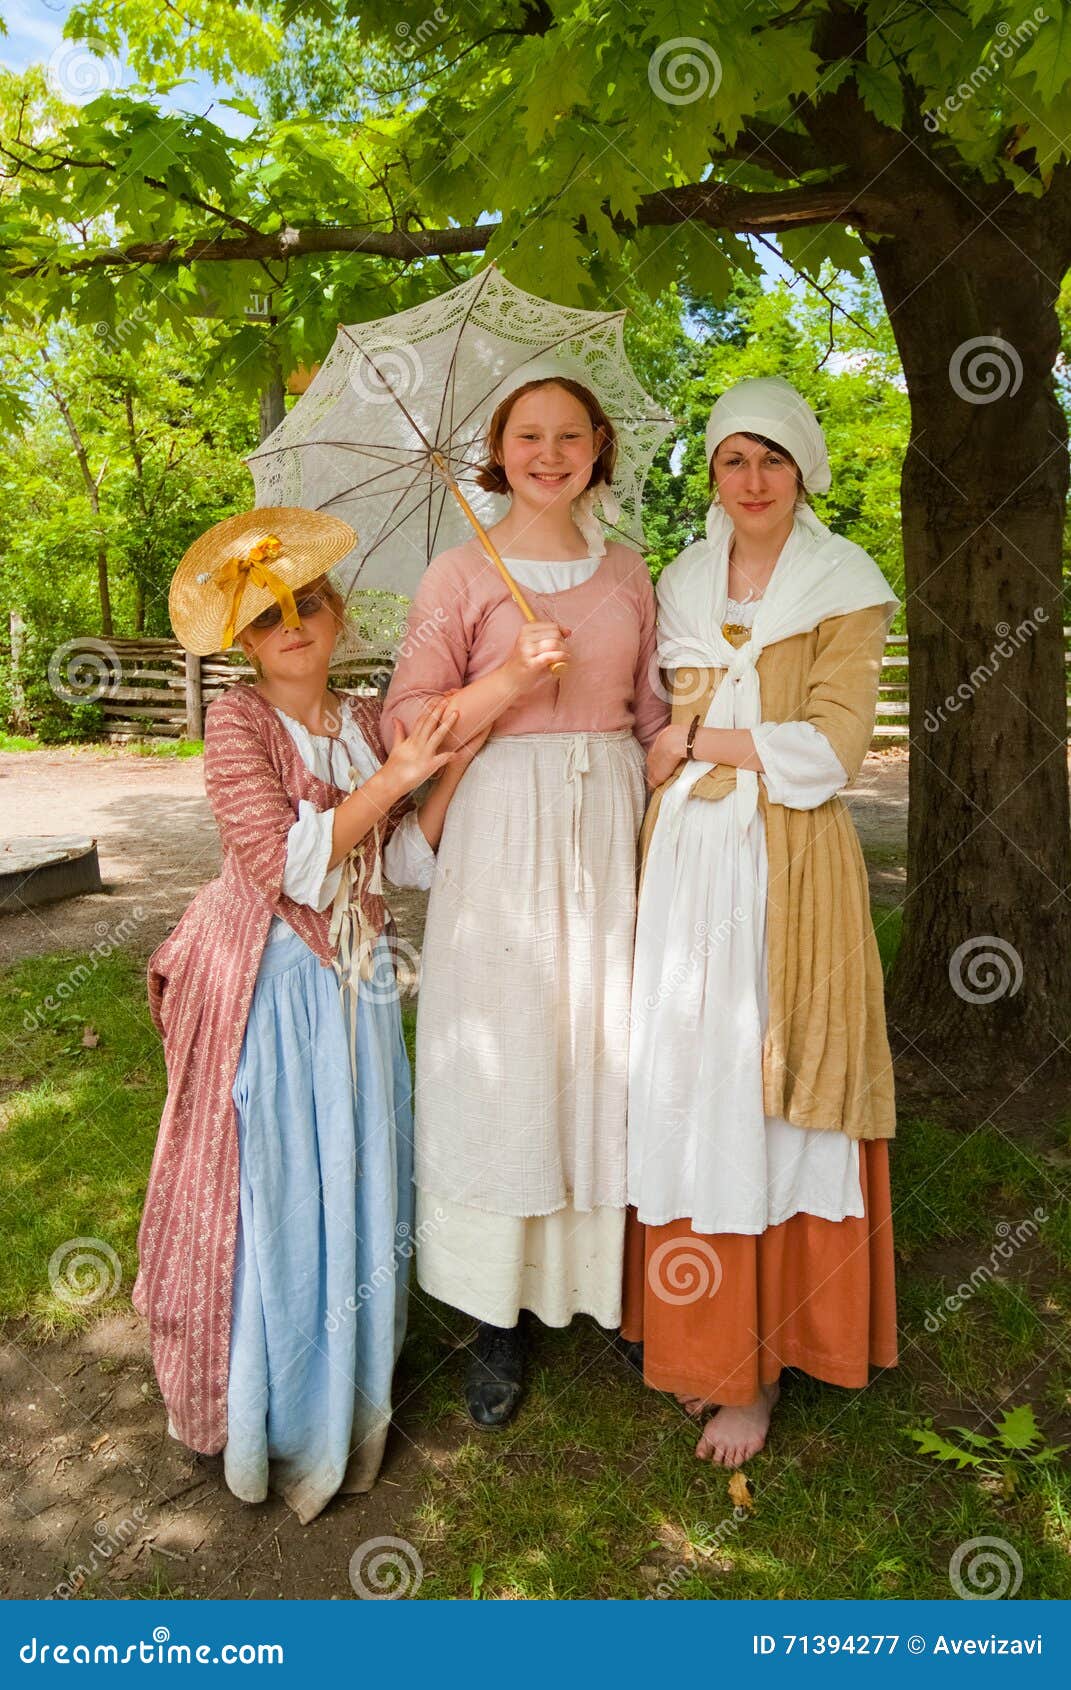 https://thumbs.dreamstime.com/z/three-young-female-models-demonstrating-old-fashion-cloths-toronto-ontario-canada-june-girls-standing-group-heritage-black-71394277.jpg